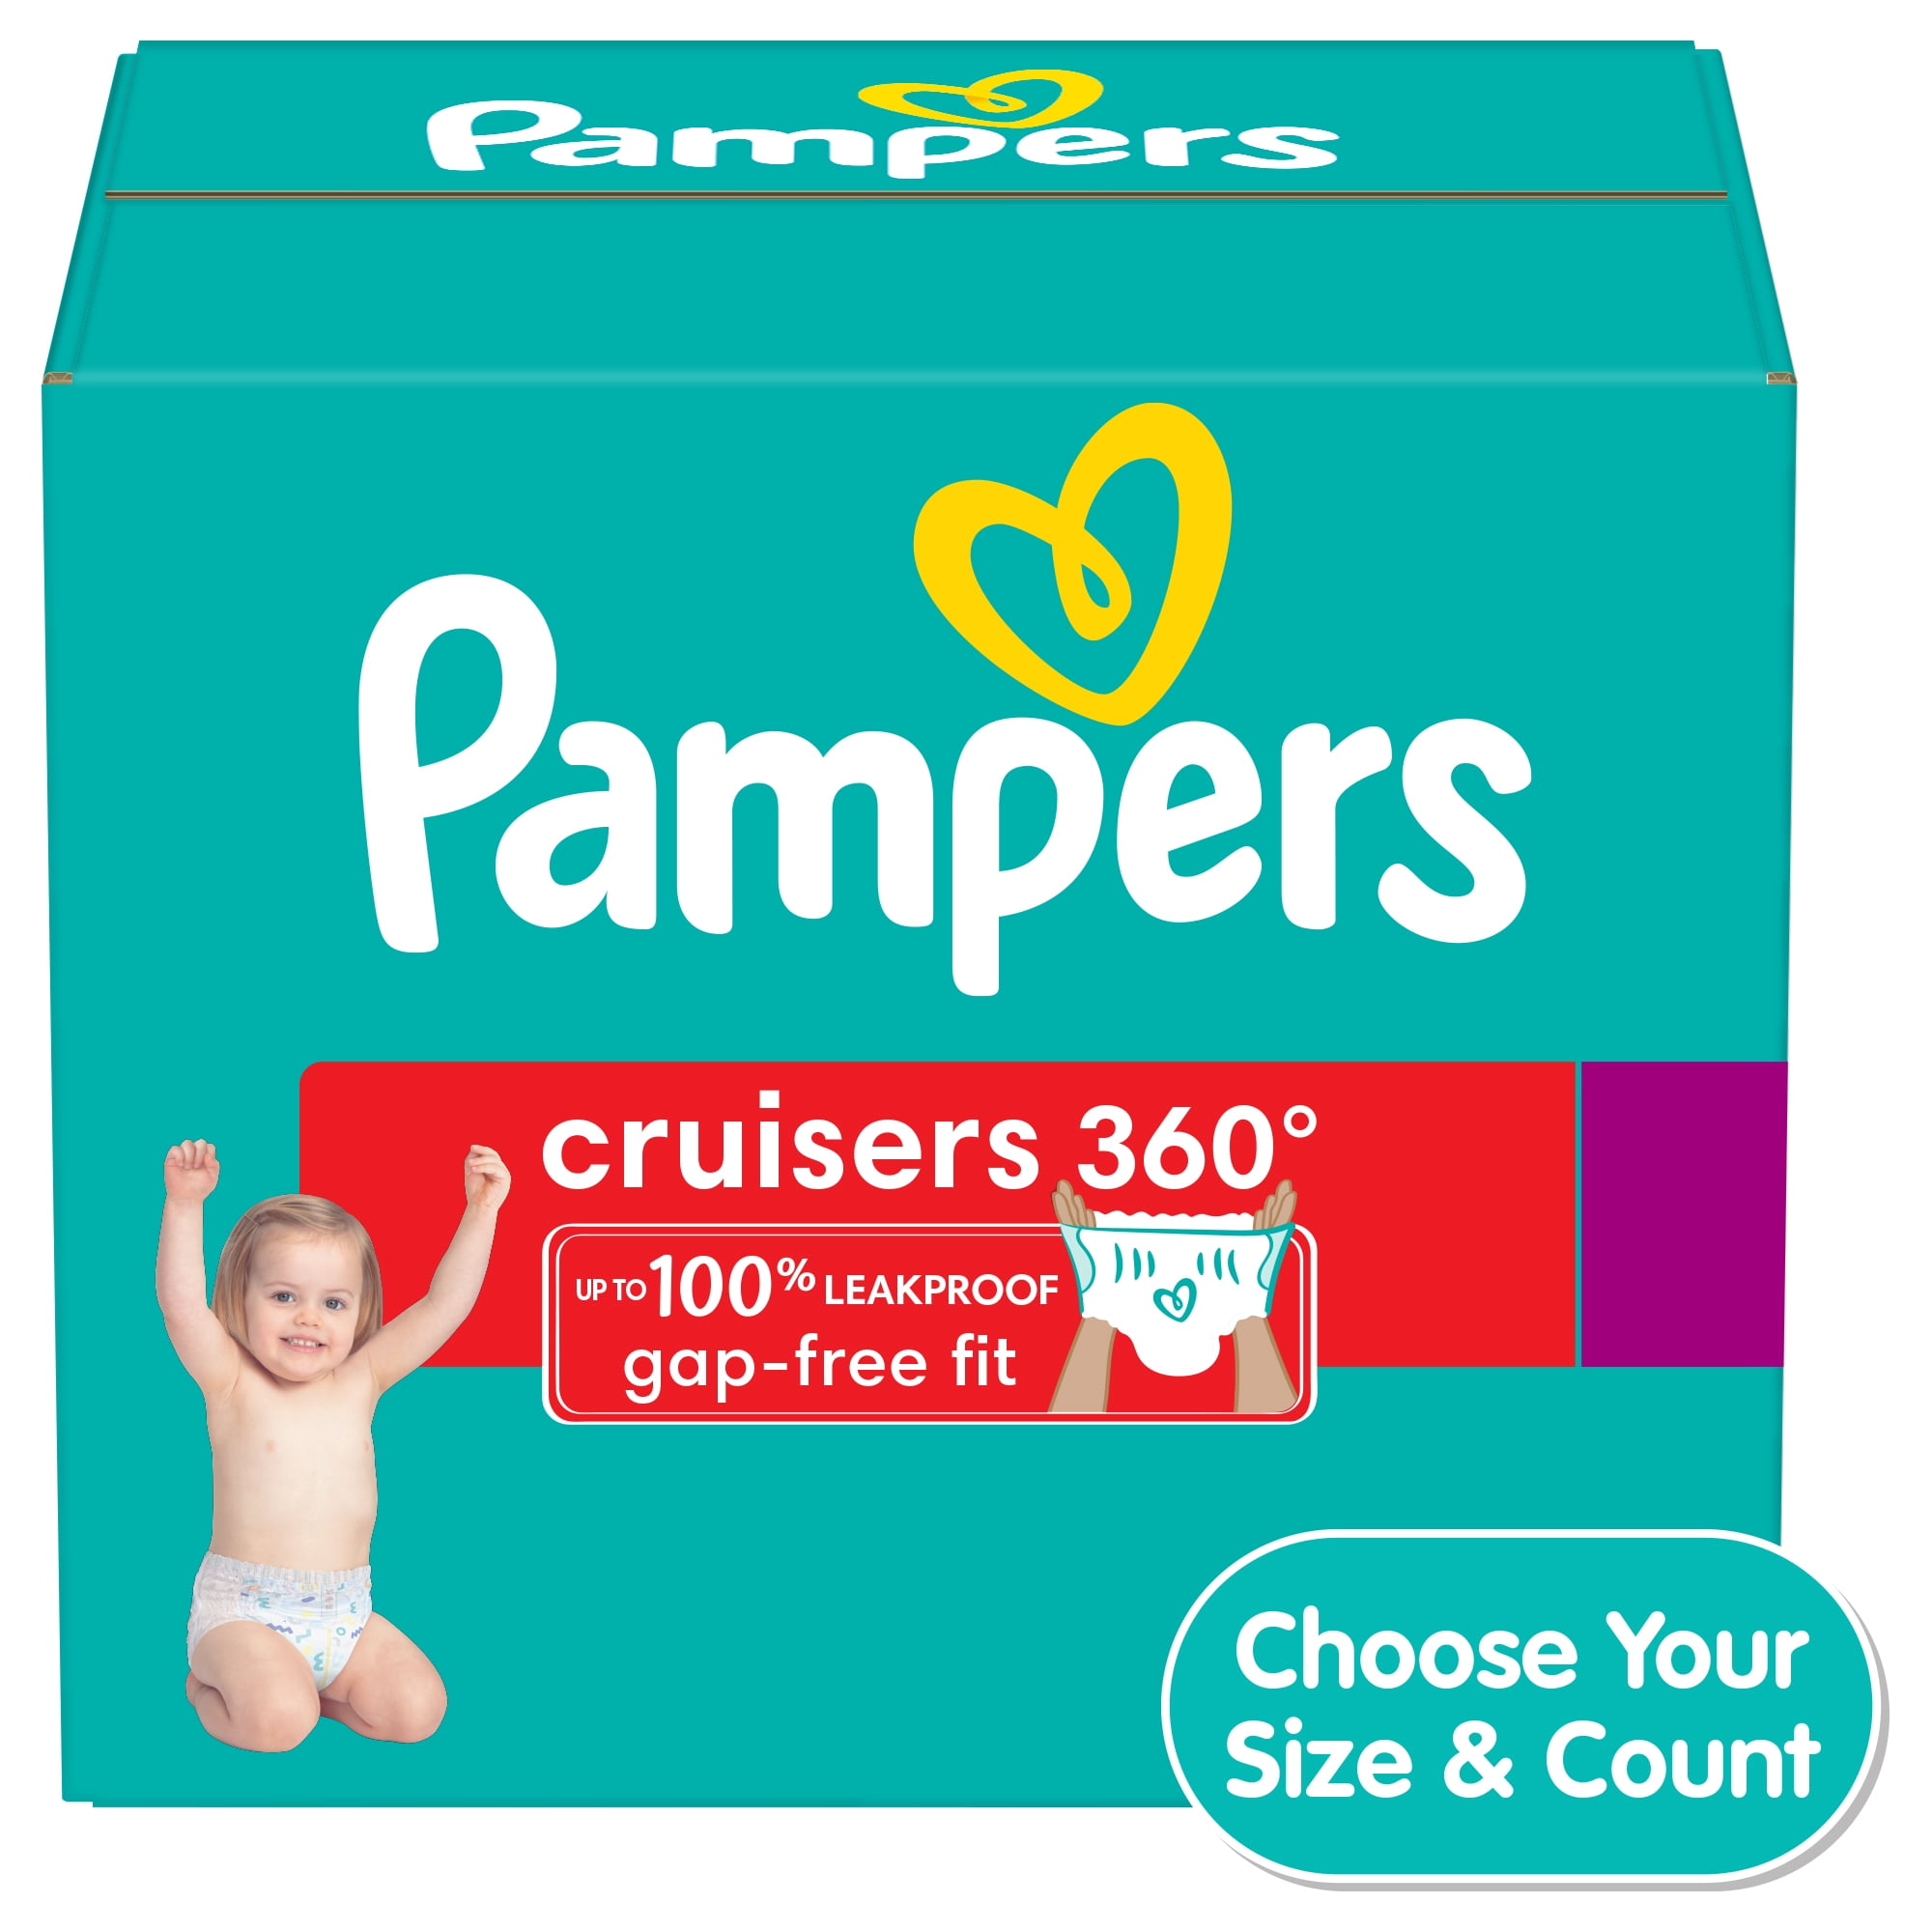 Pampers Baby Diapers and Wipes 2 Month Supply - Two Cruisers 360 Disposable Baby Diapers Sizes 3, 168 Count 864 Count with Sensitive Water-Based Baby Wipes 